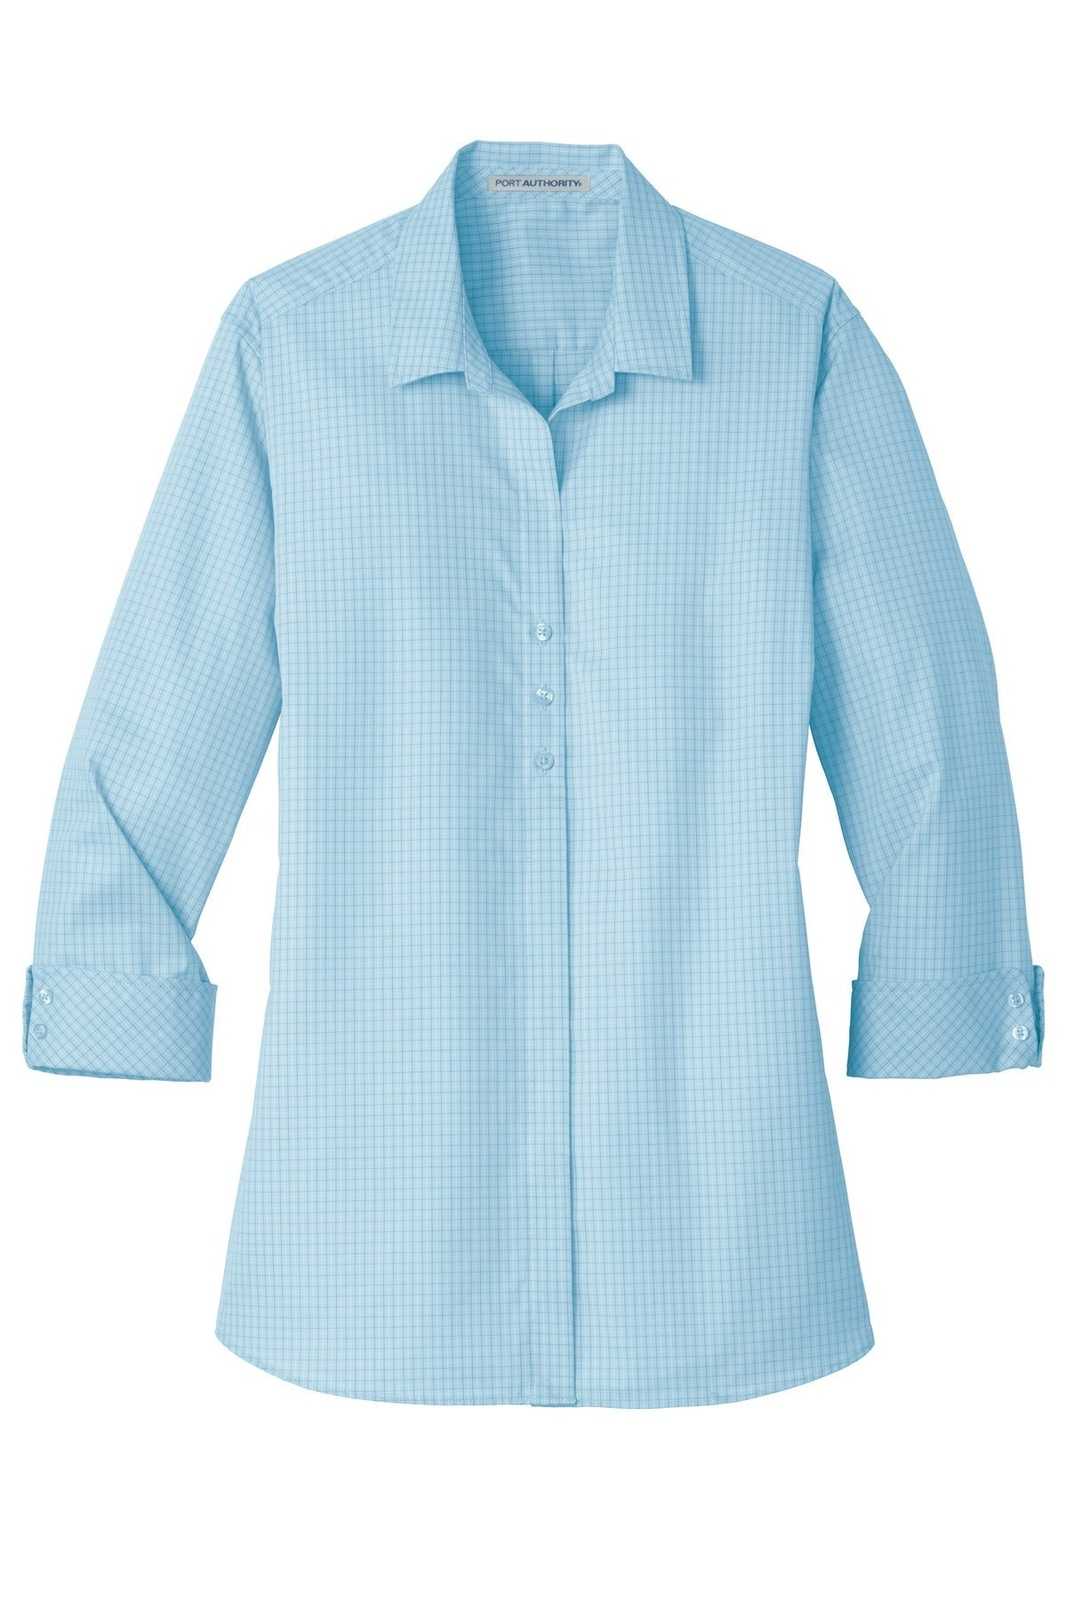 Port Authority LW643 Ladies 3/4-Sleeve Micro Tattersall Easy Care Shirt - Heritage Blue Royal - HIT a Double - 5